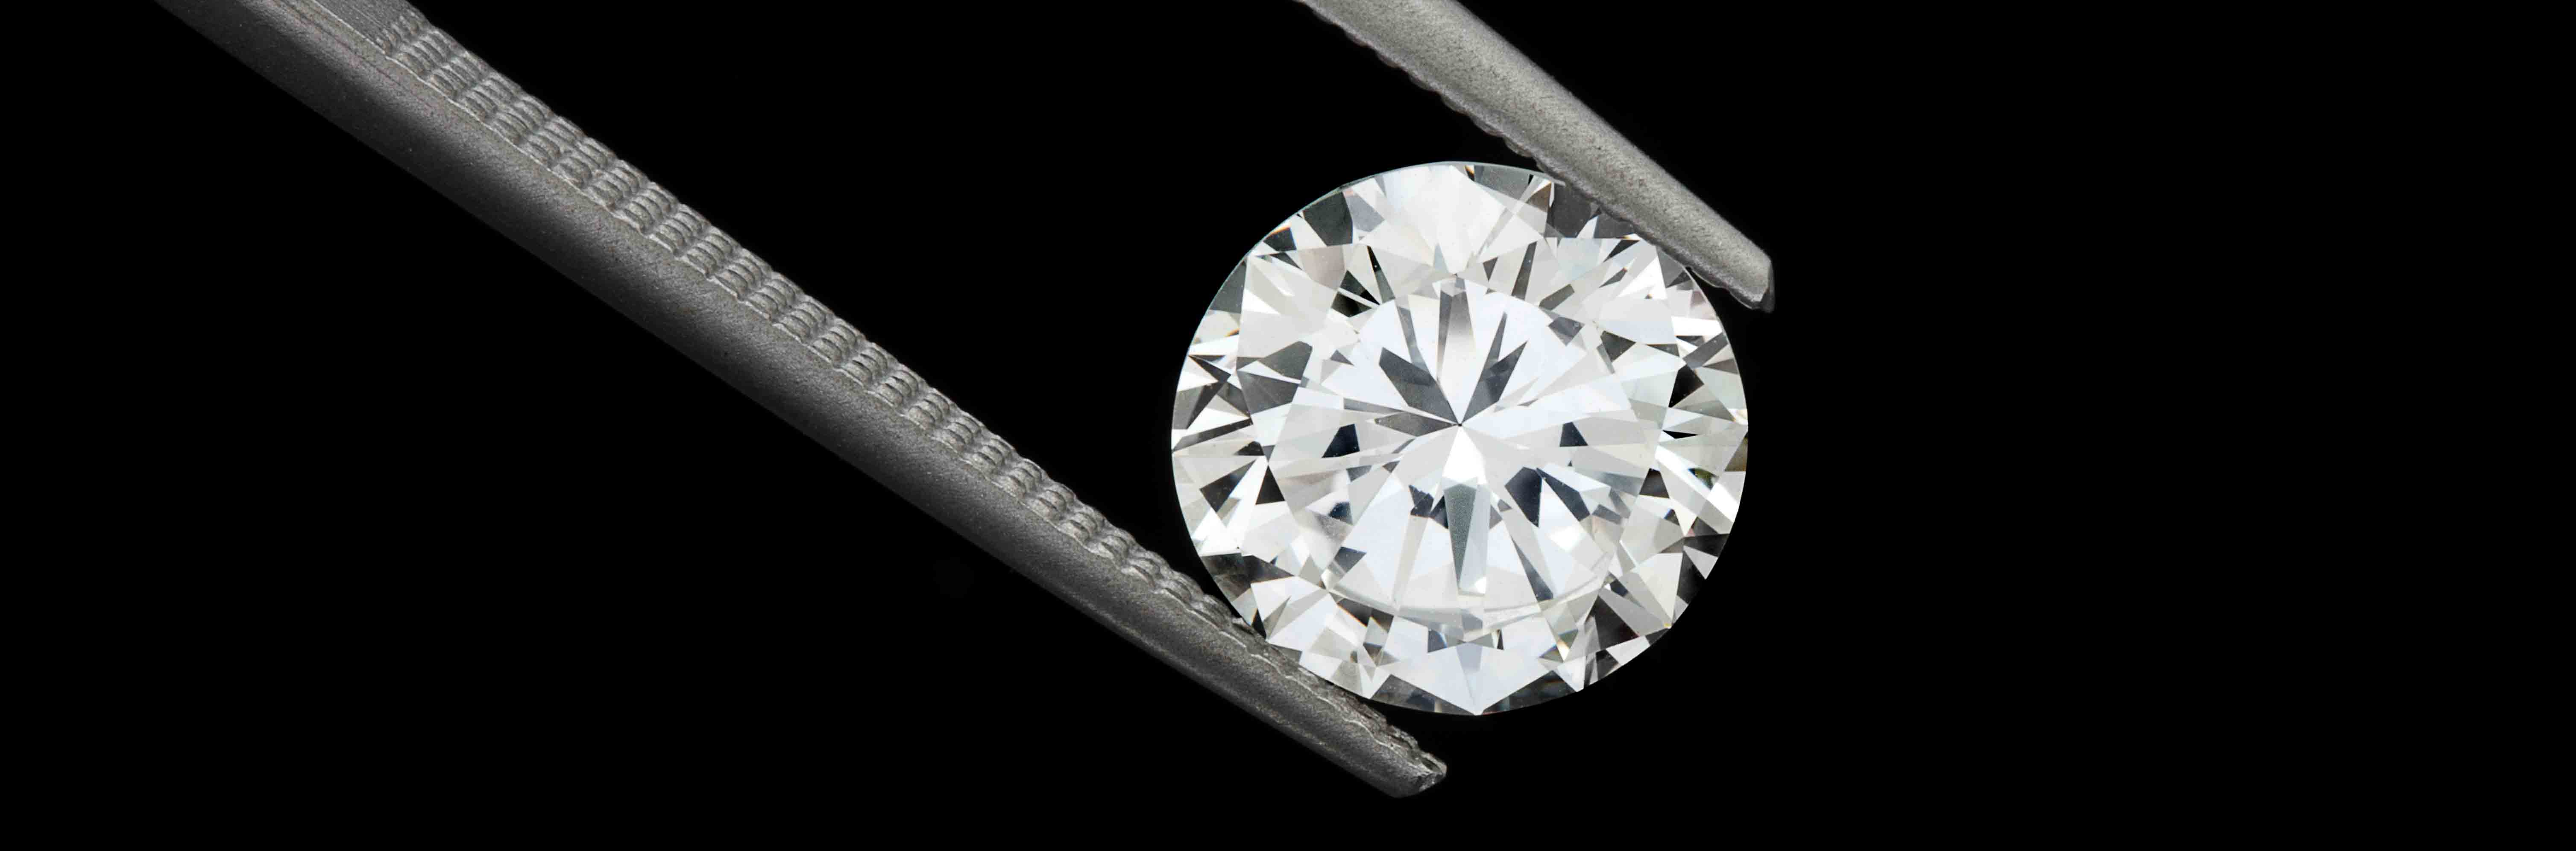 International Marketing: A Diamond is Forever: DeBeers New